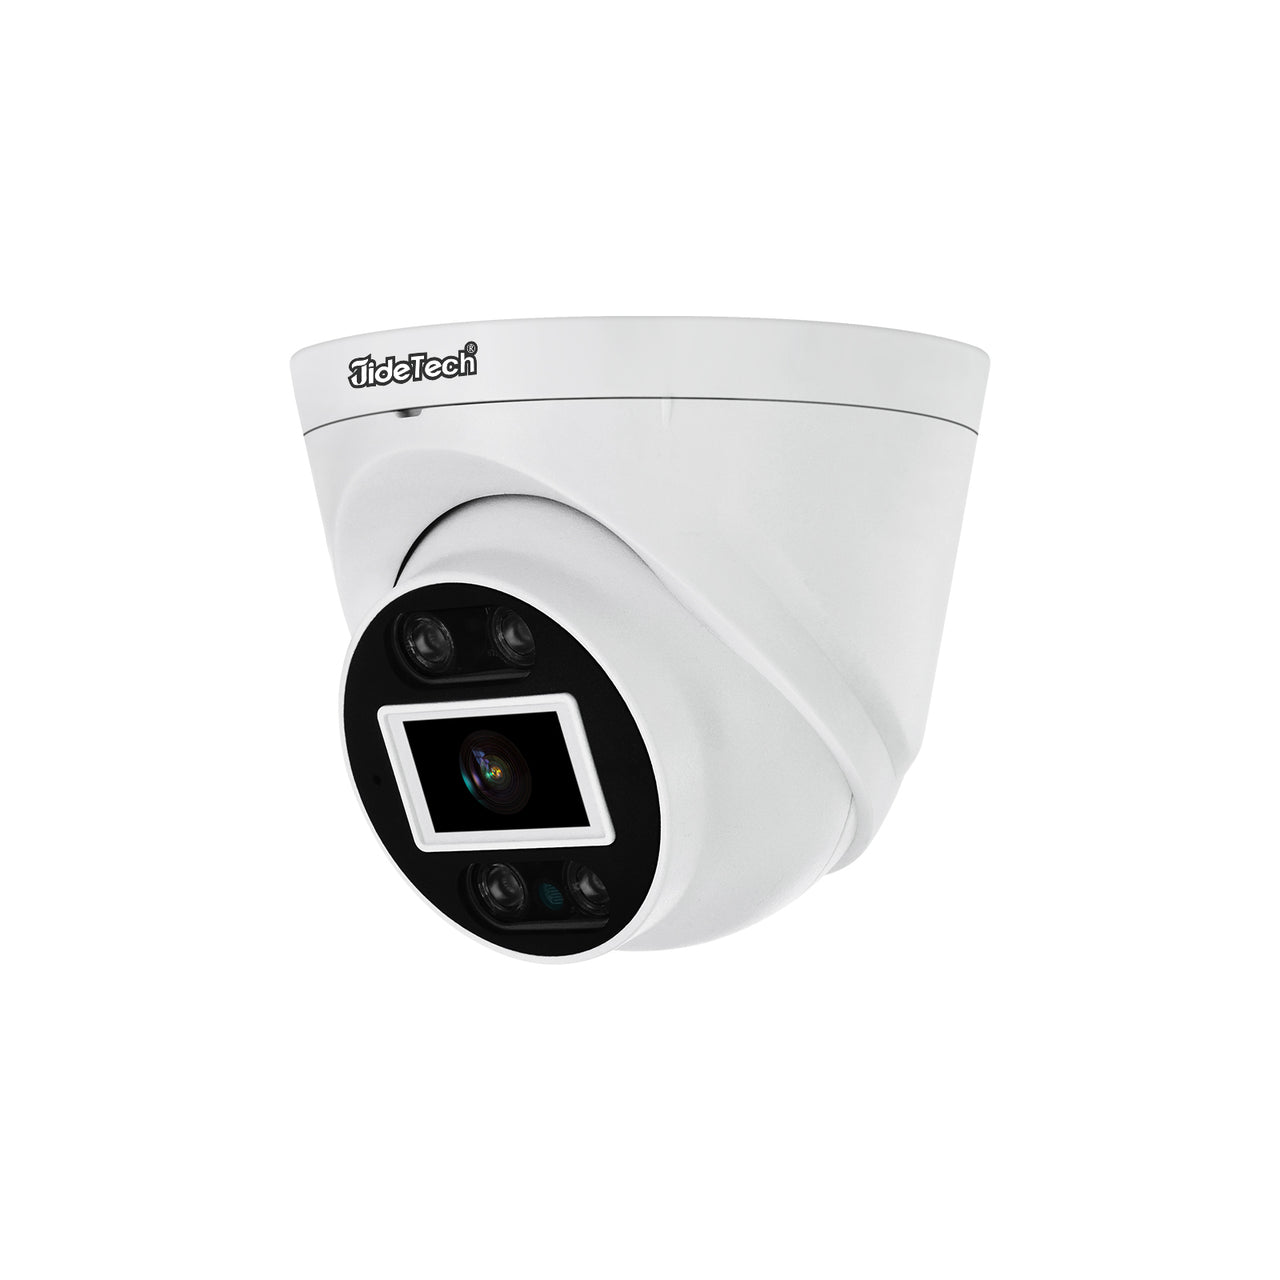 Professional Dome/Bullet Camera